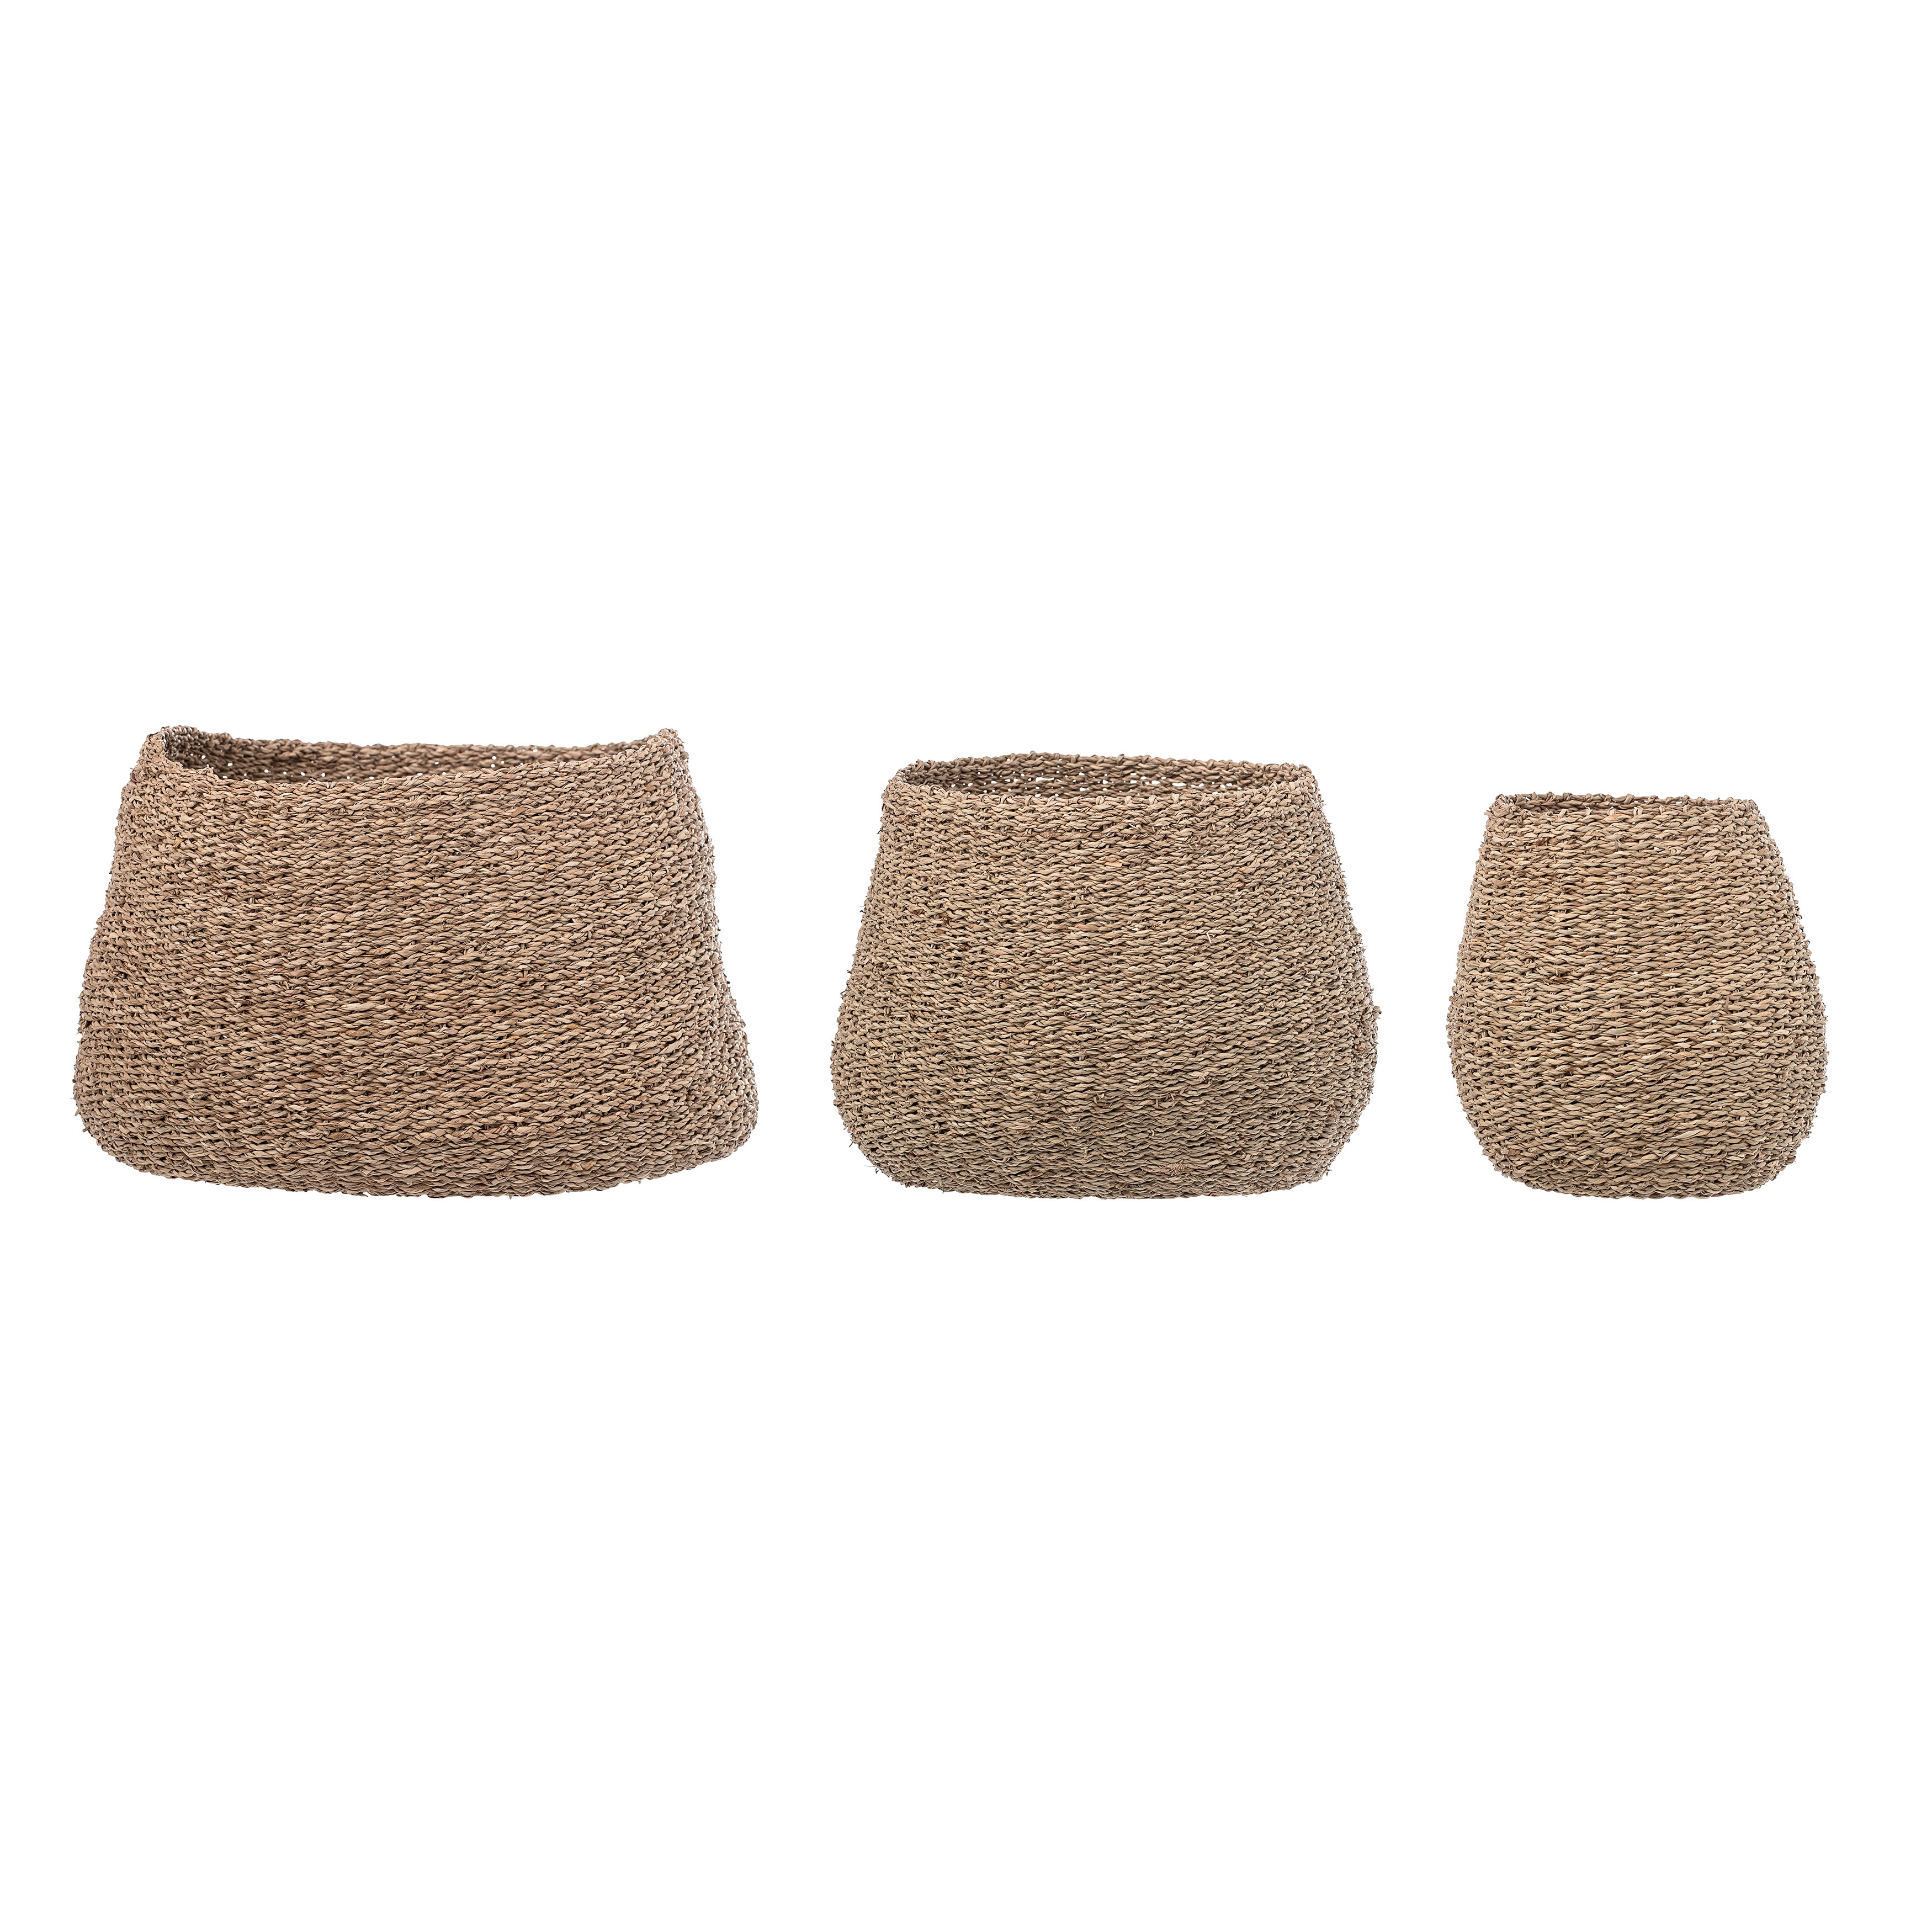 Brown Natural Seagrass Baskets (Set of 3 Sizes) - Image 0